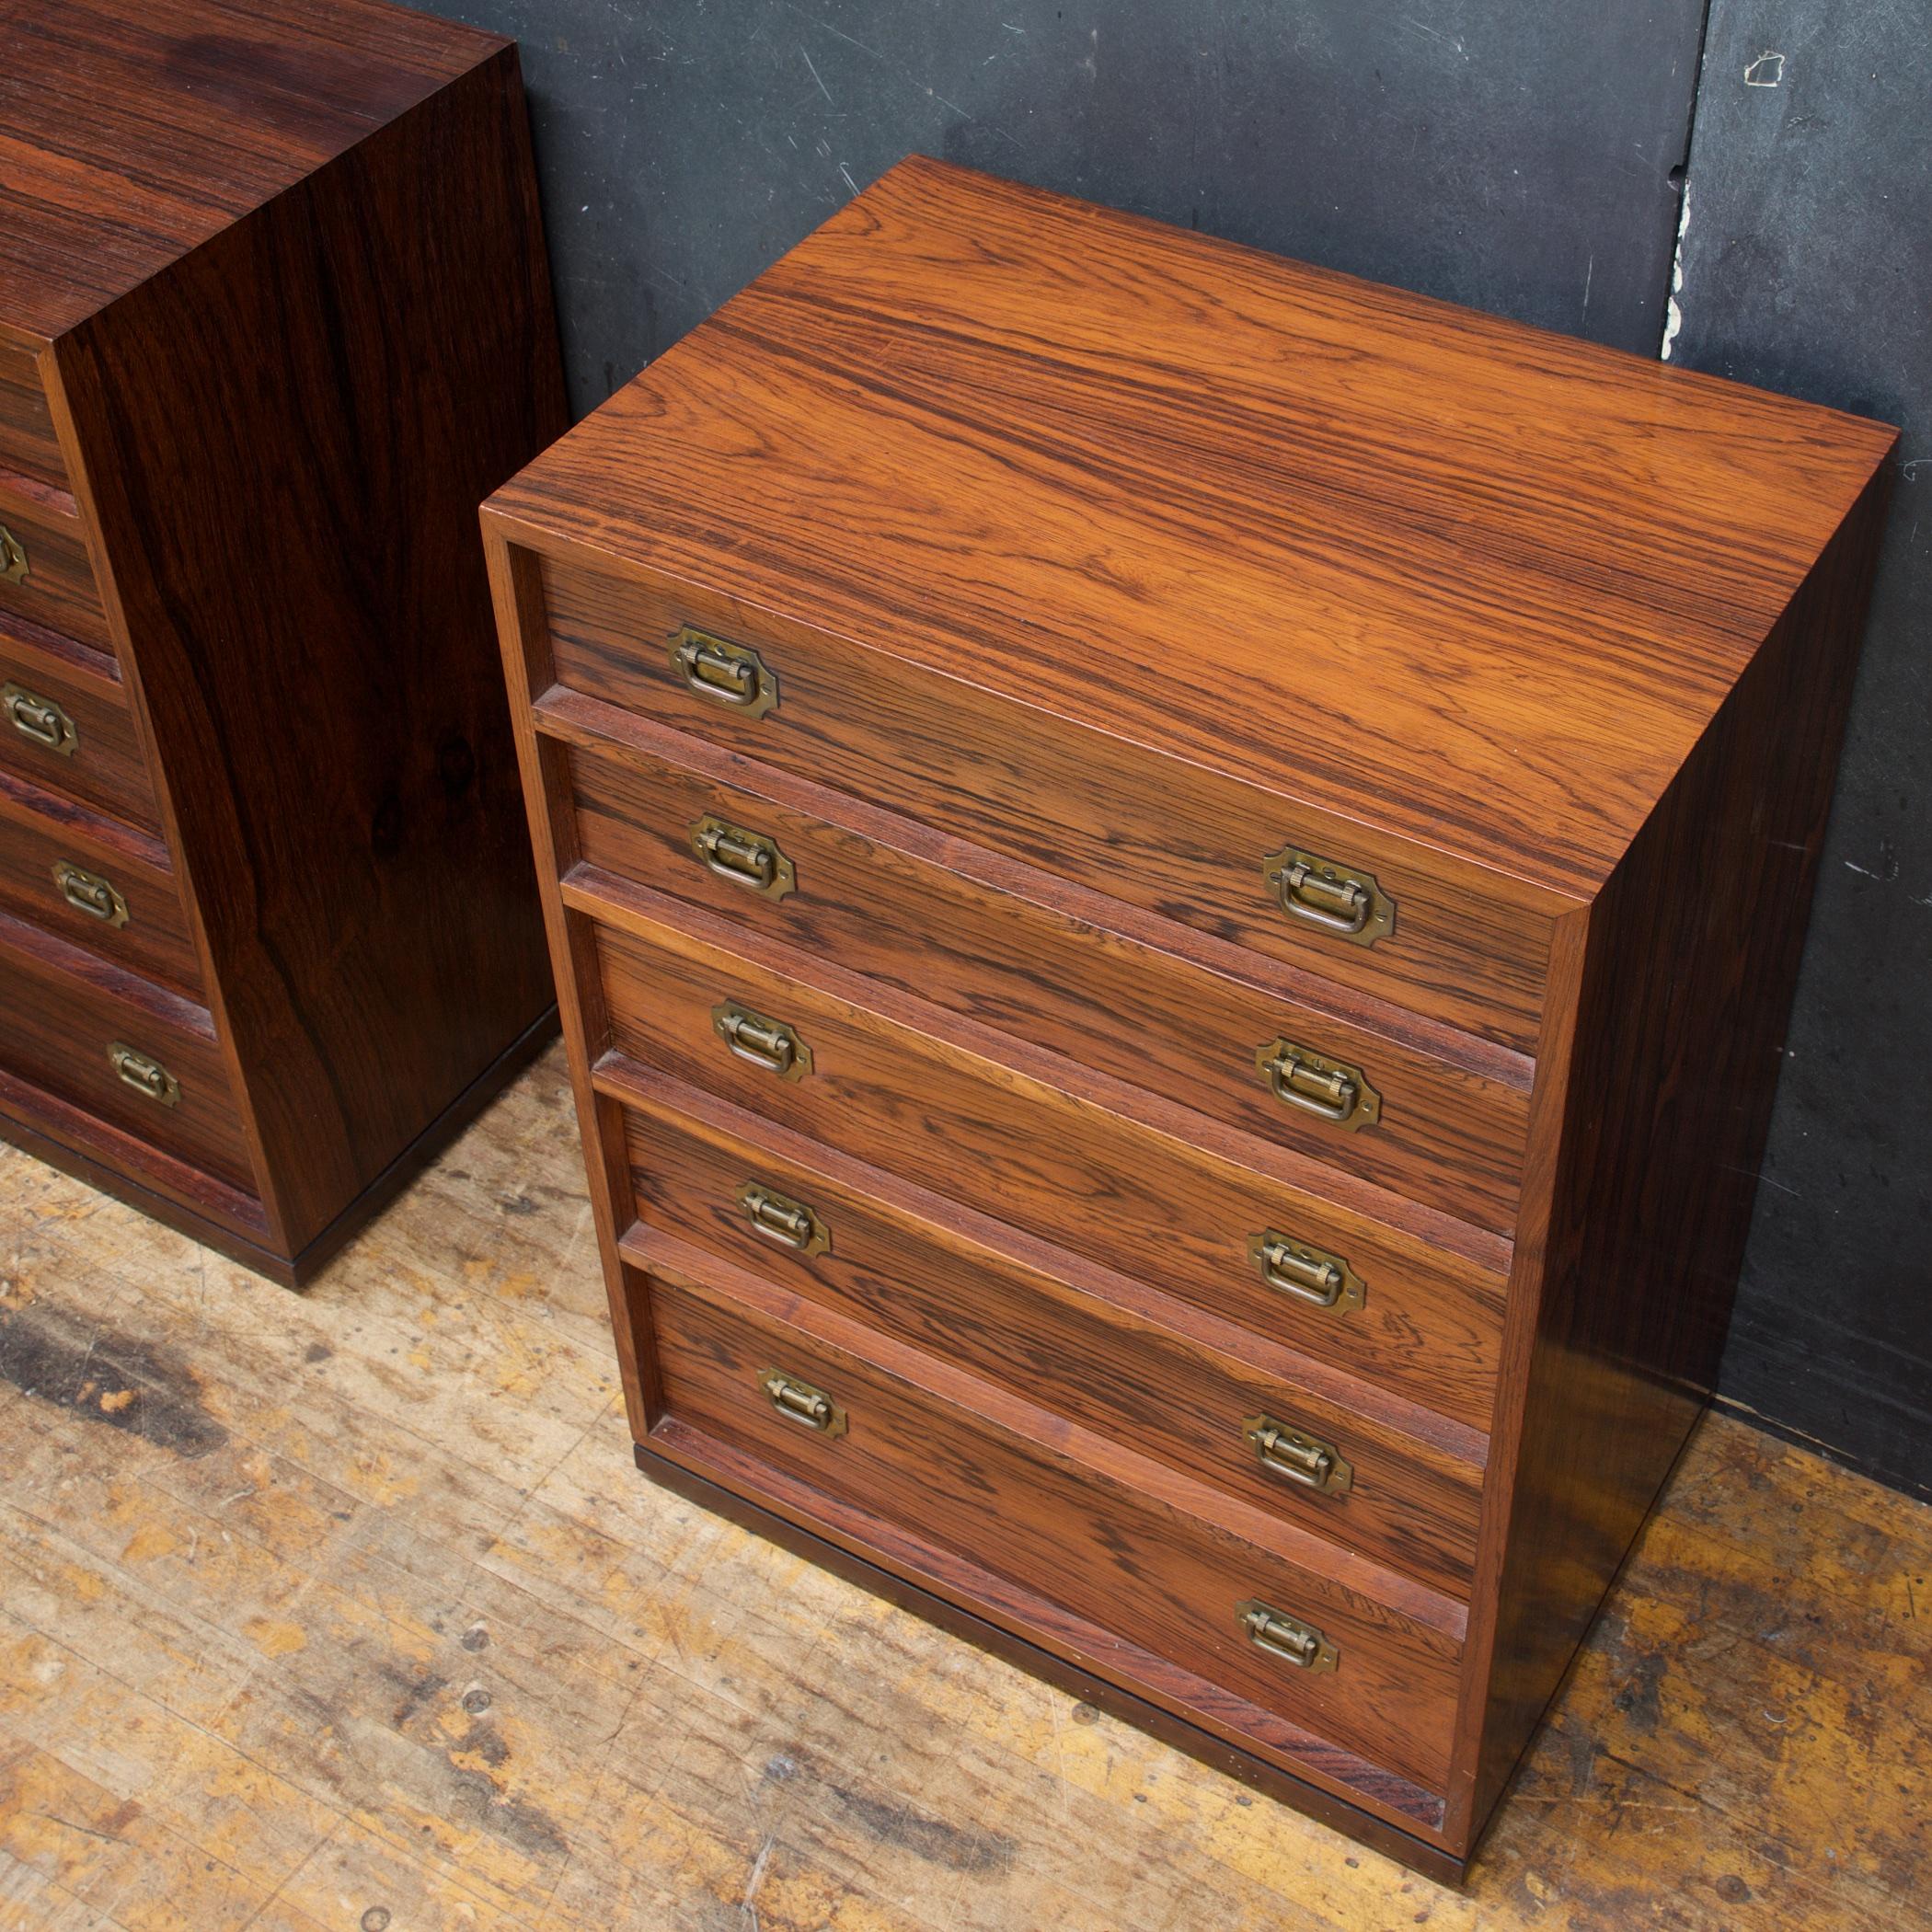 Veneer Henning Korch Rosewood Campaign Jewelry Chest Drawers Lingerie Dresser Denmark For Sale